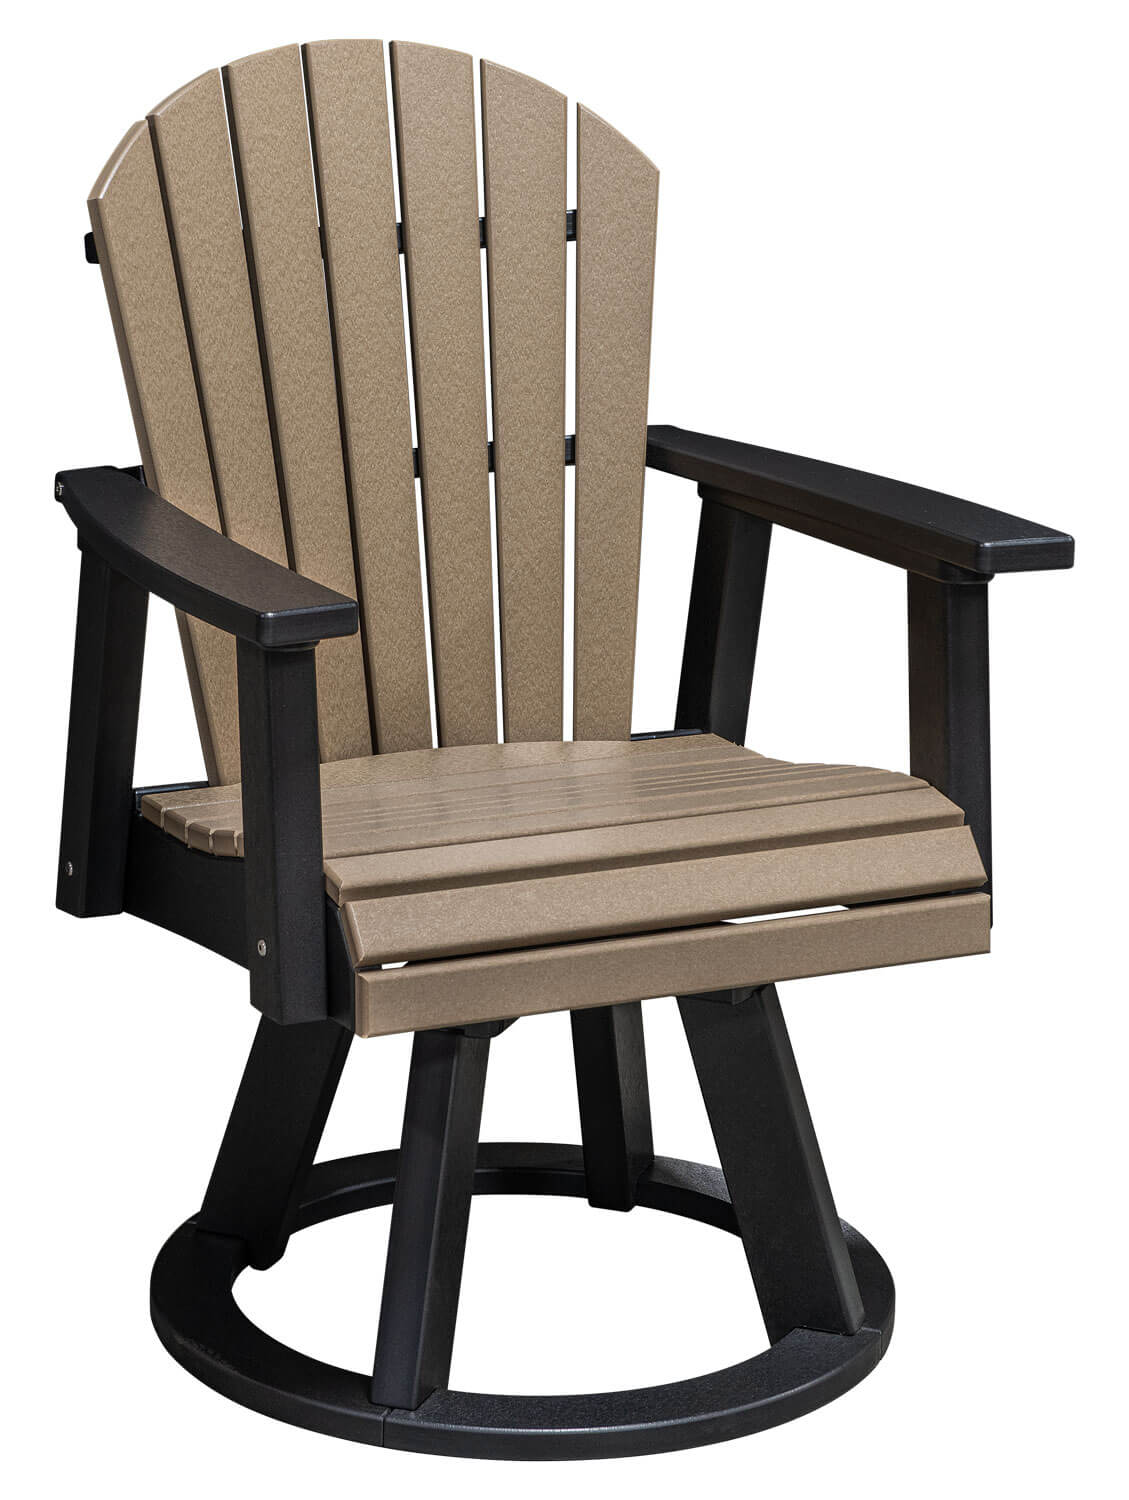 EC Woods Westbrook Outdoor Poly Dining Height Swivel Chair Shown in Weathered Wood and Black